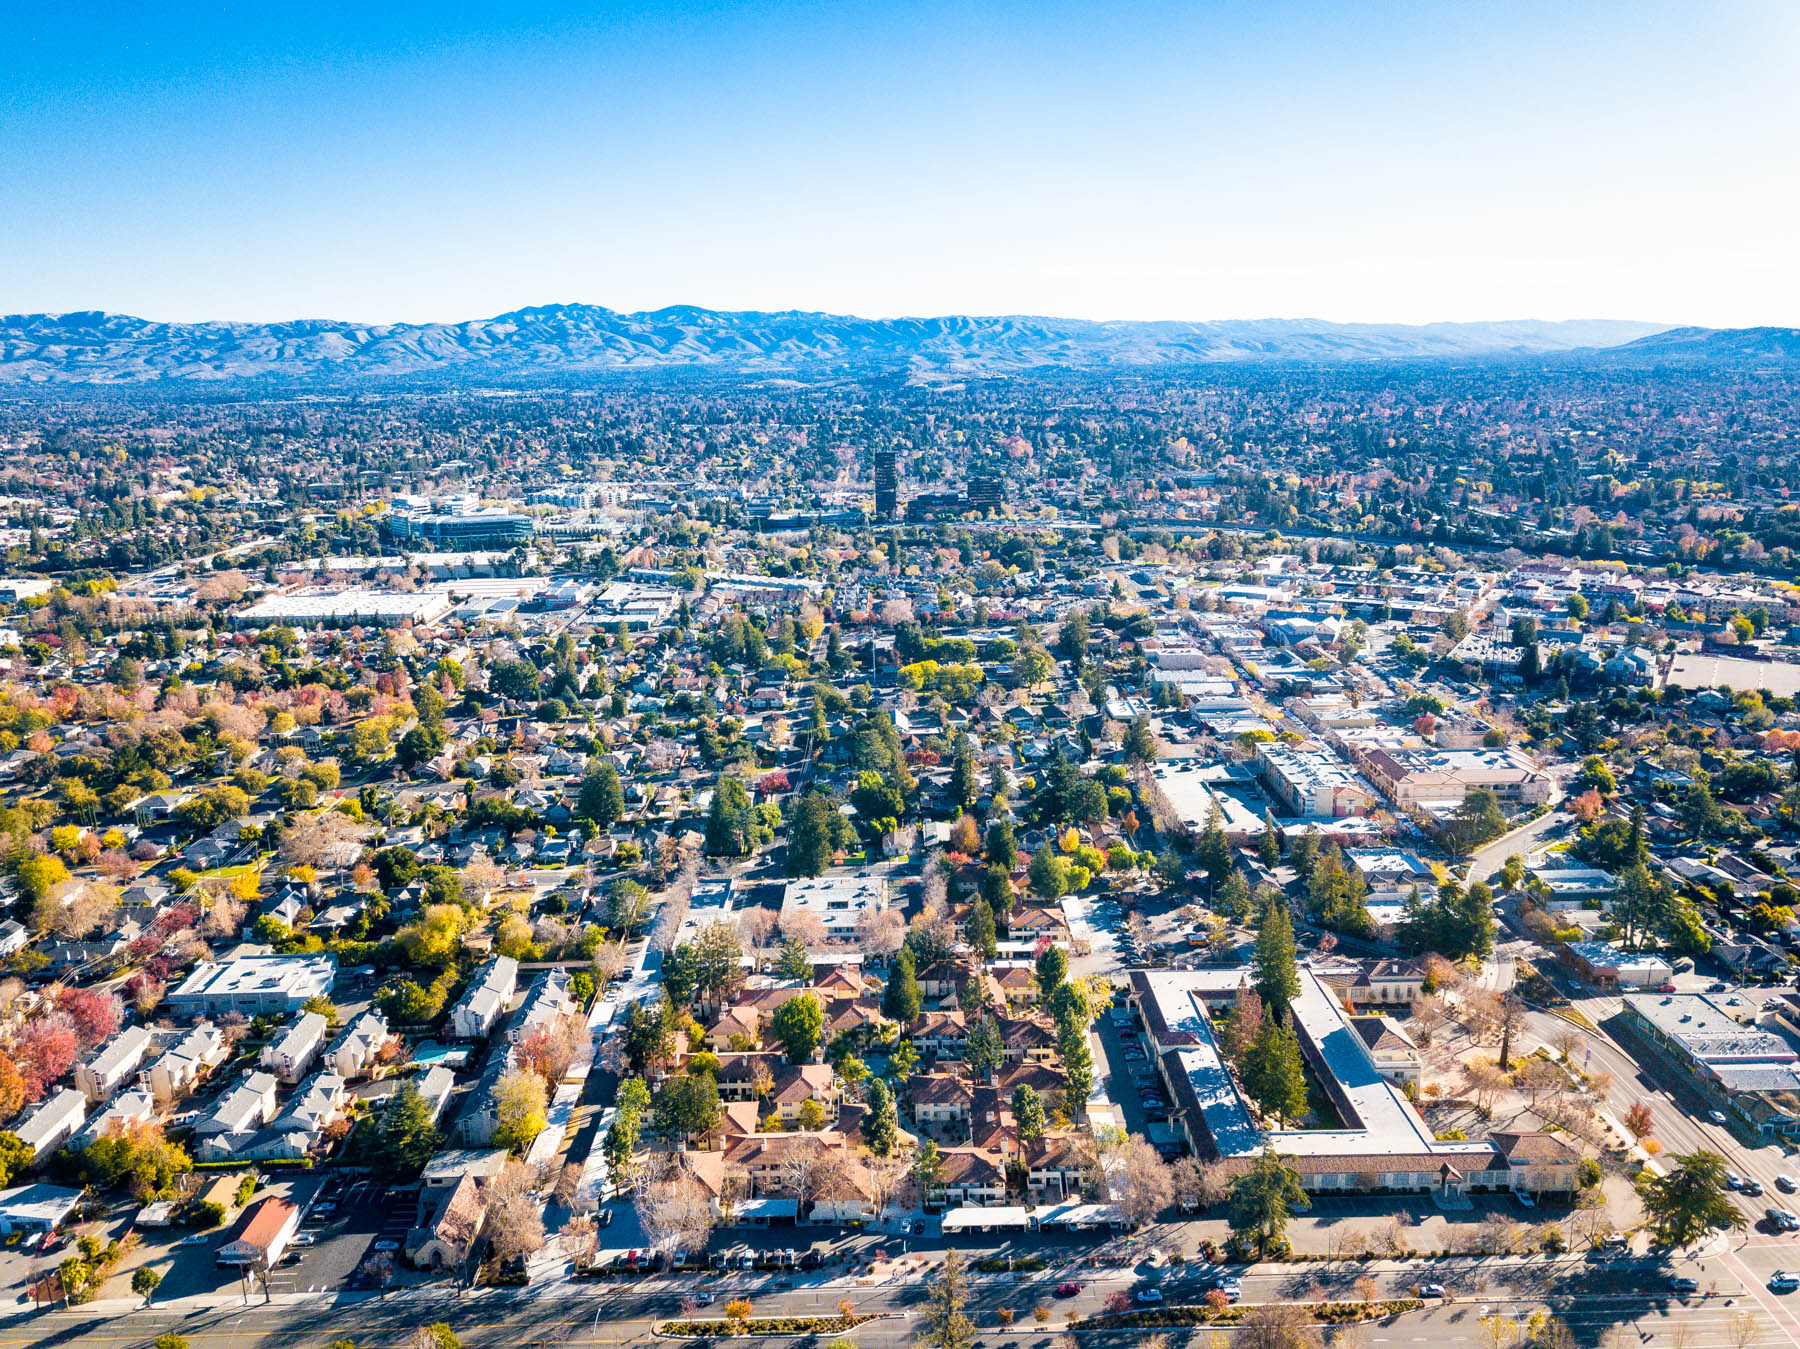 Pros and cons of living in San Jose